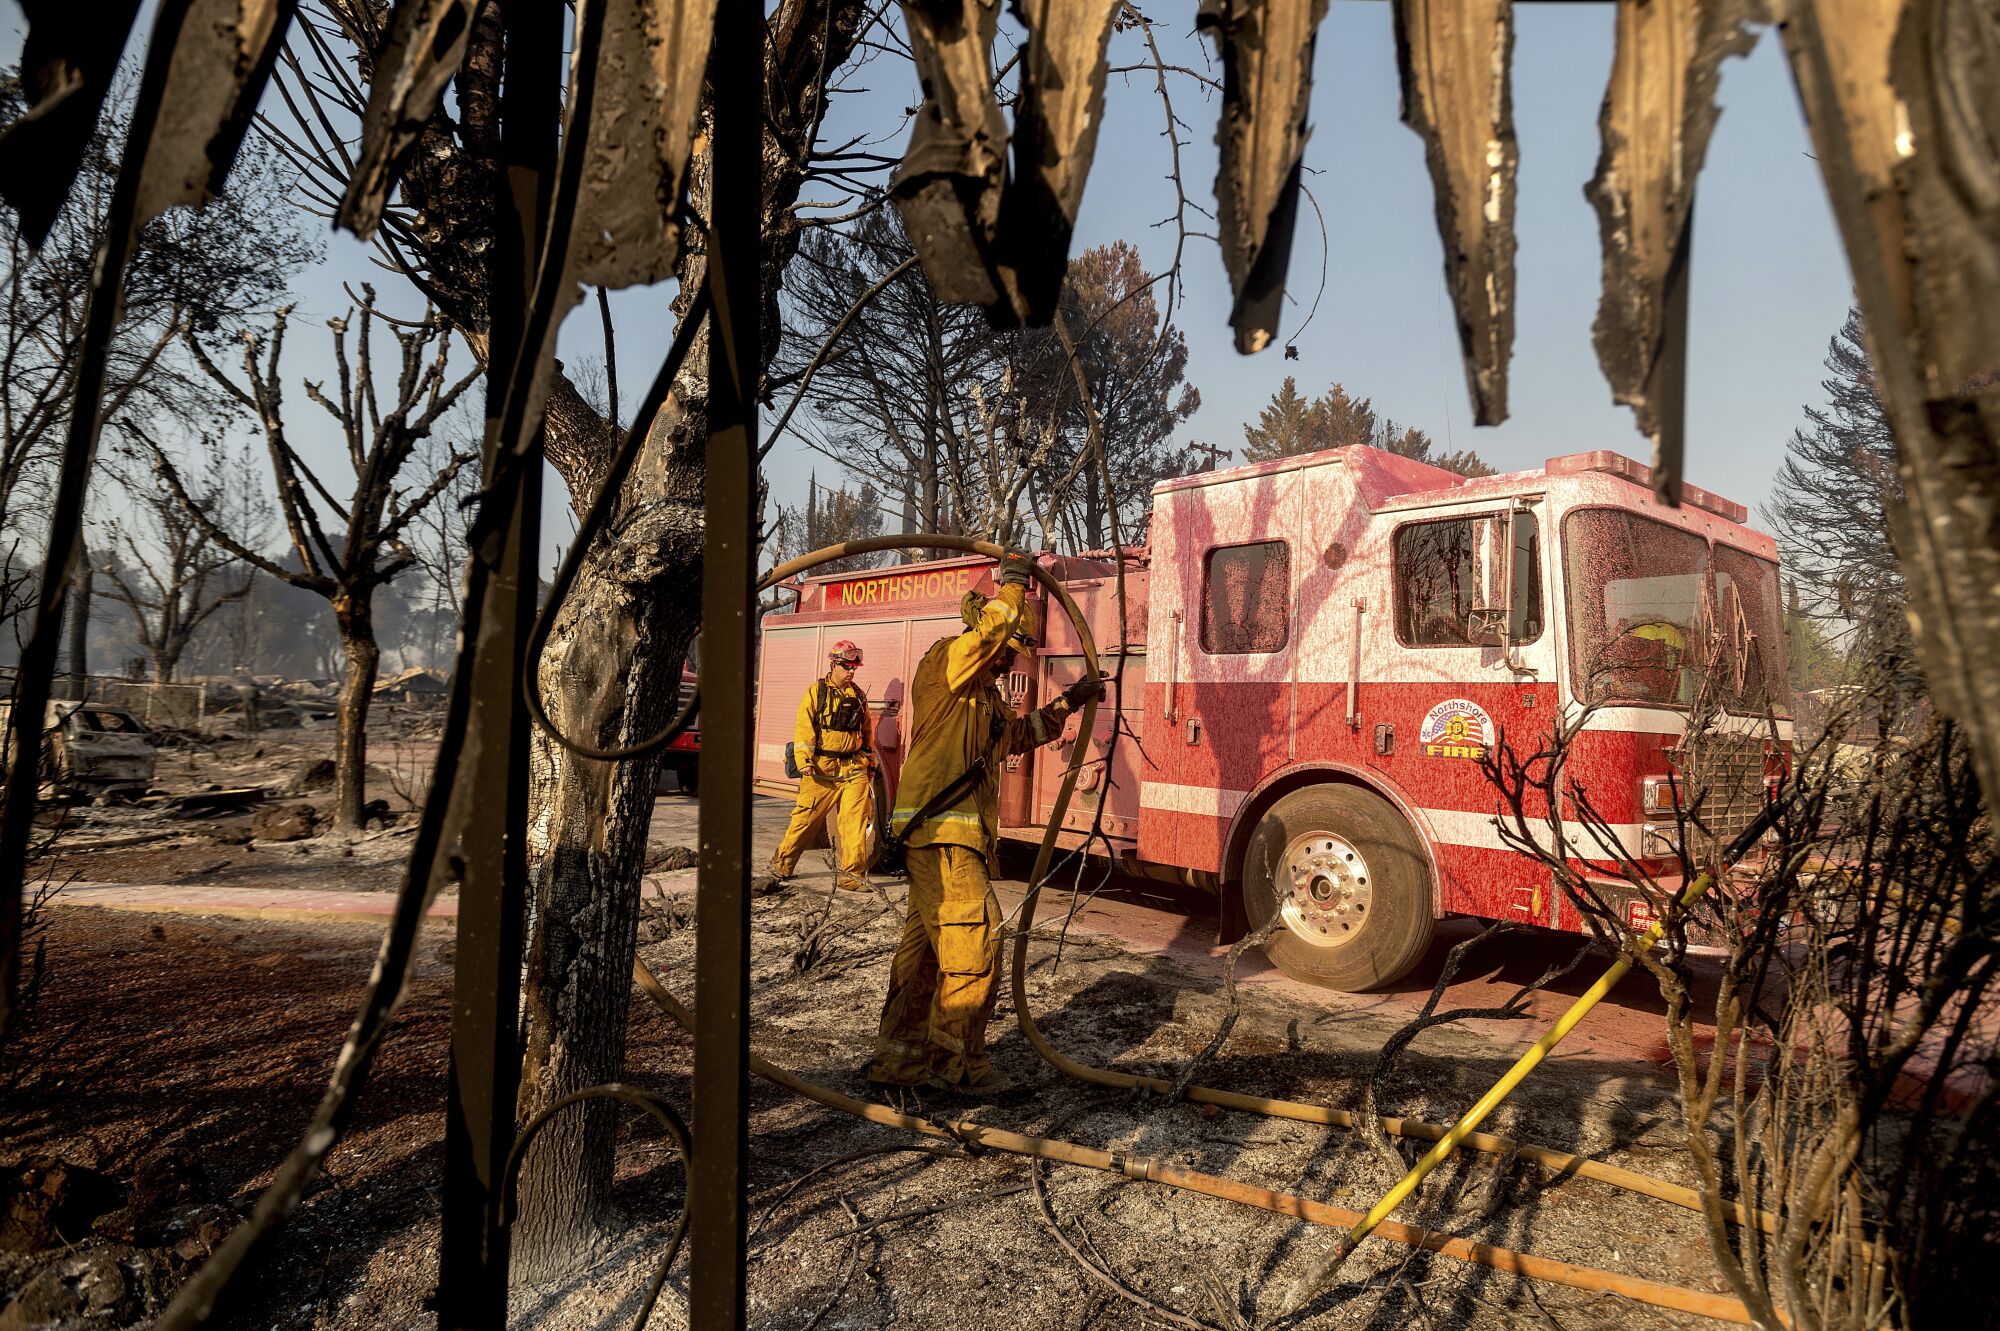 Firefighters mop up at Cache Creek Mobile Home Estates where the Cache fire leveled dozens of residences in Clearlake.